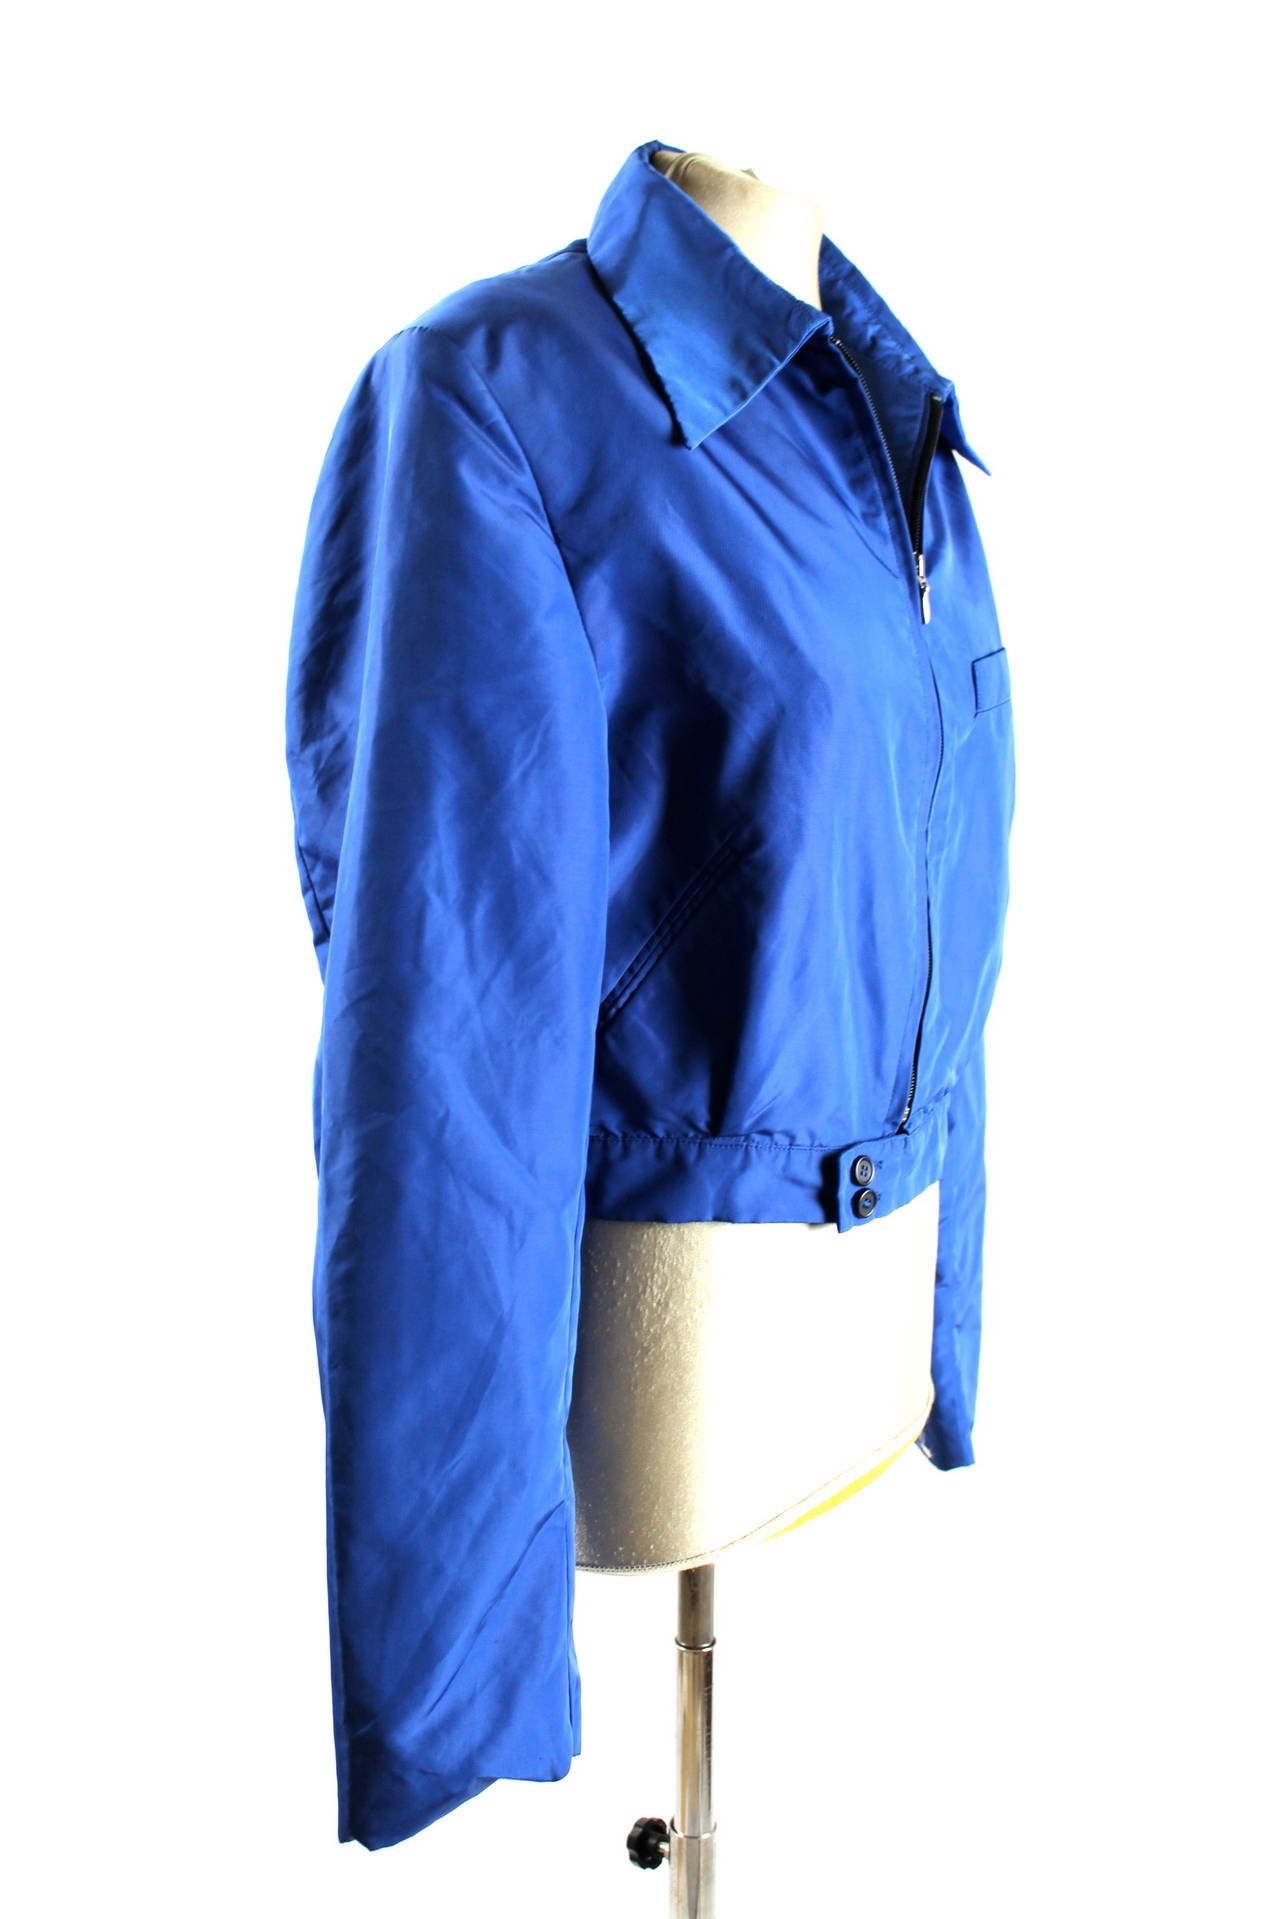 Rare Jacket from Alexander McQueen

Blue jacket from The Hunger Collection

Faux pockets to the front of jacket but has 2 usable inner pockets with button fastening. 

Very rare label with McQueen's Date of Birth

Includes original McQueen